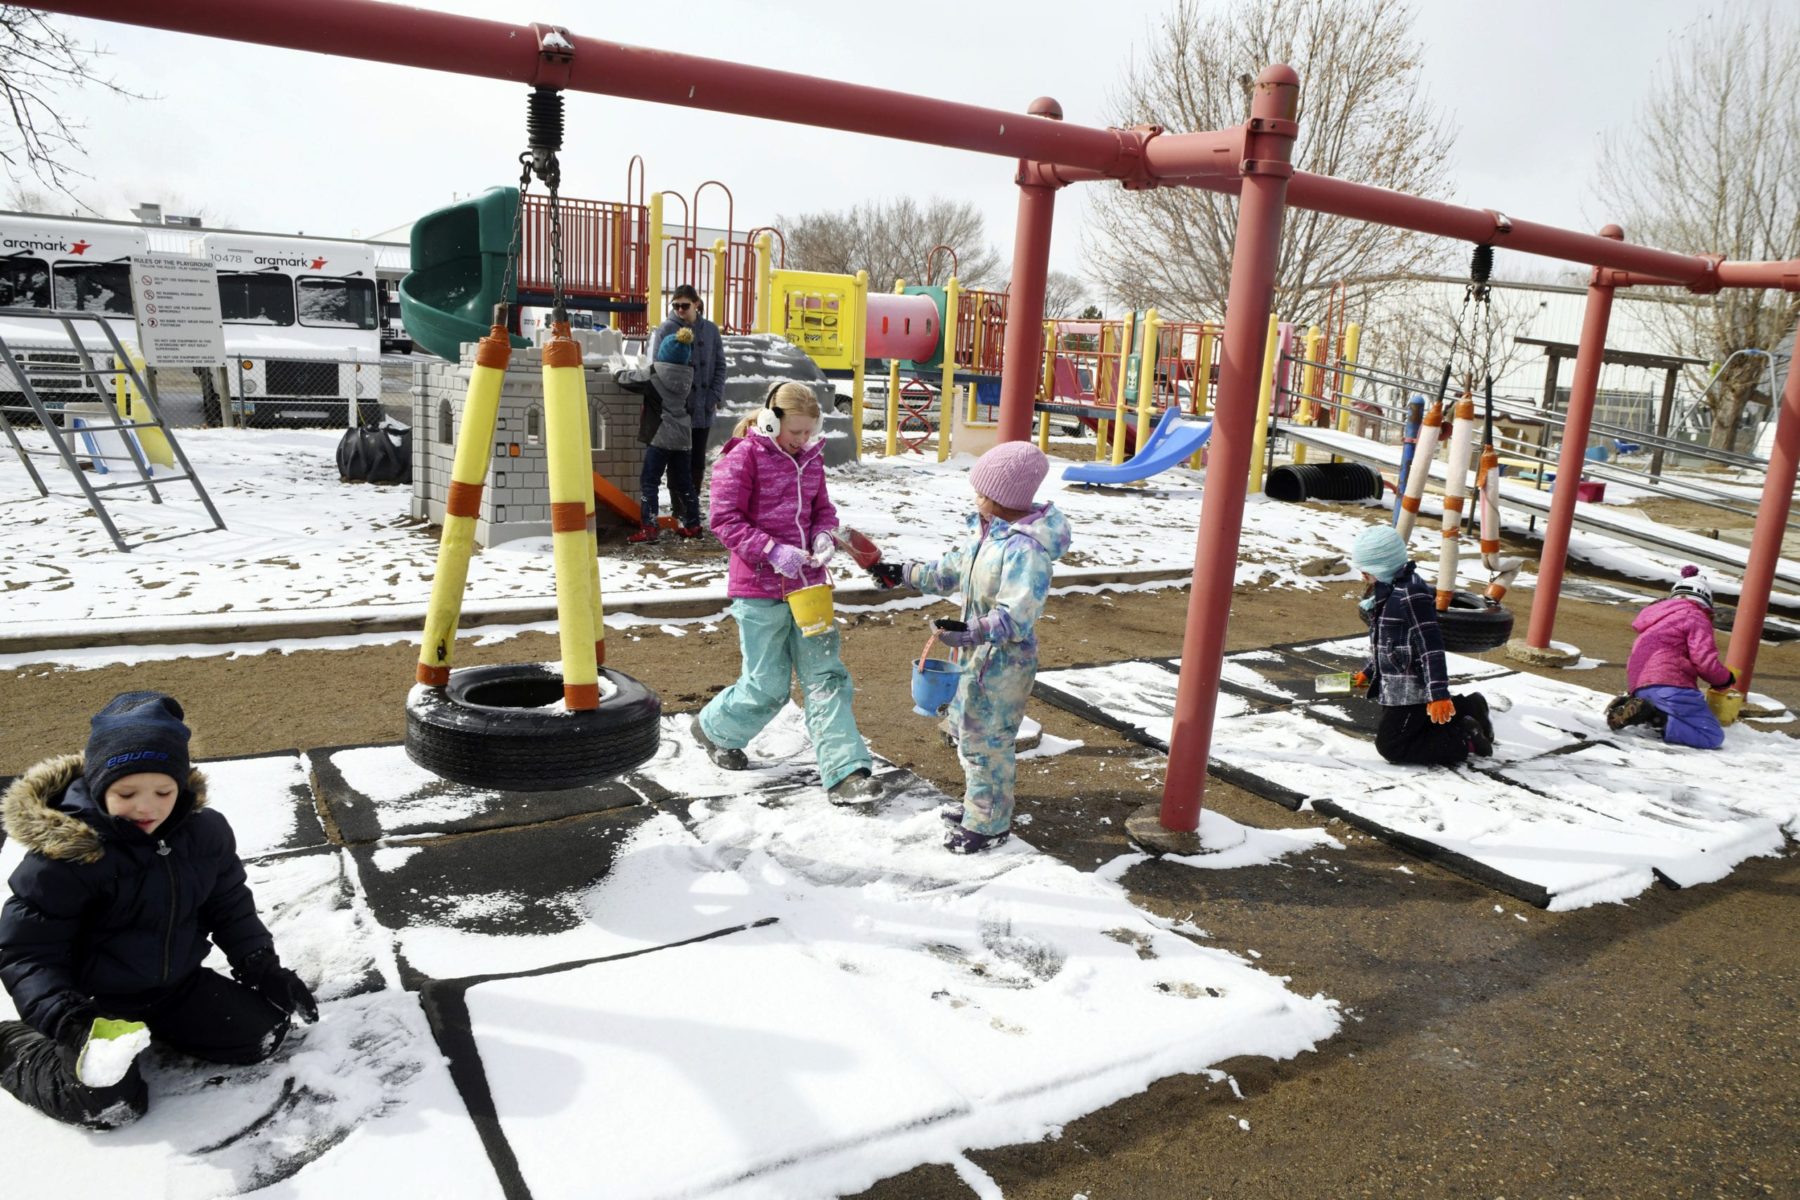 Children playing on a swing set with snow on the ground.